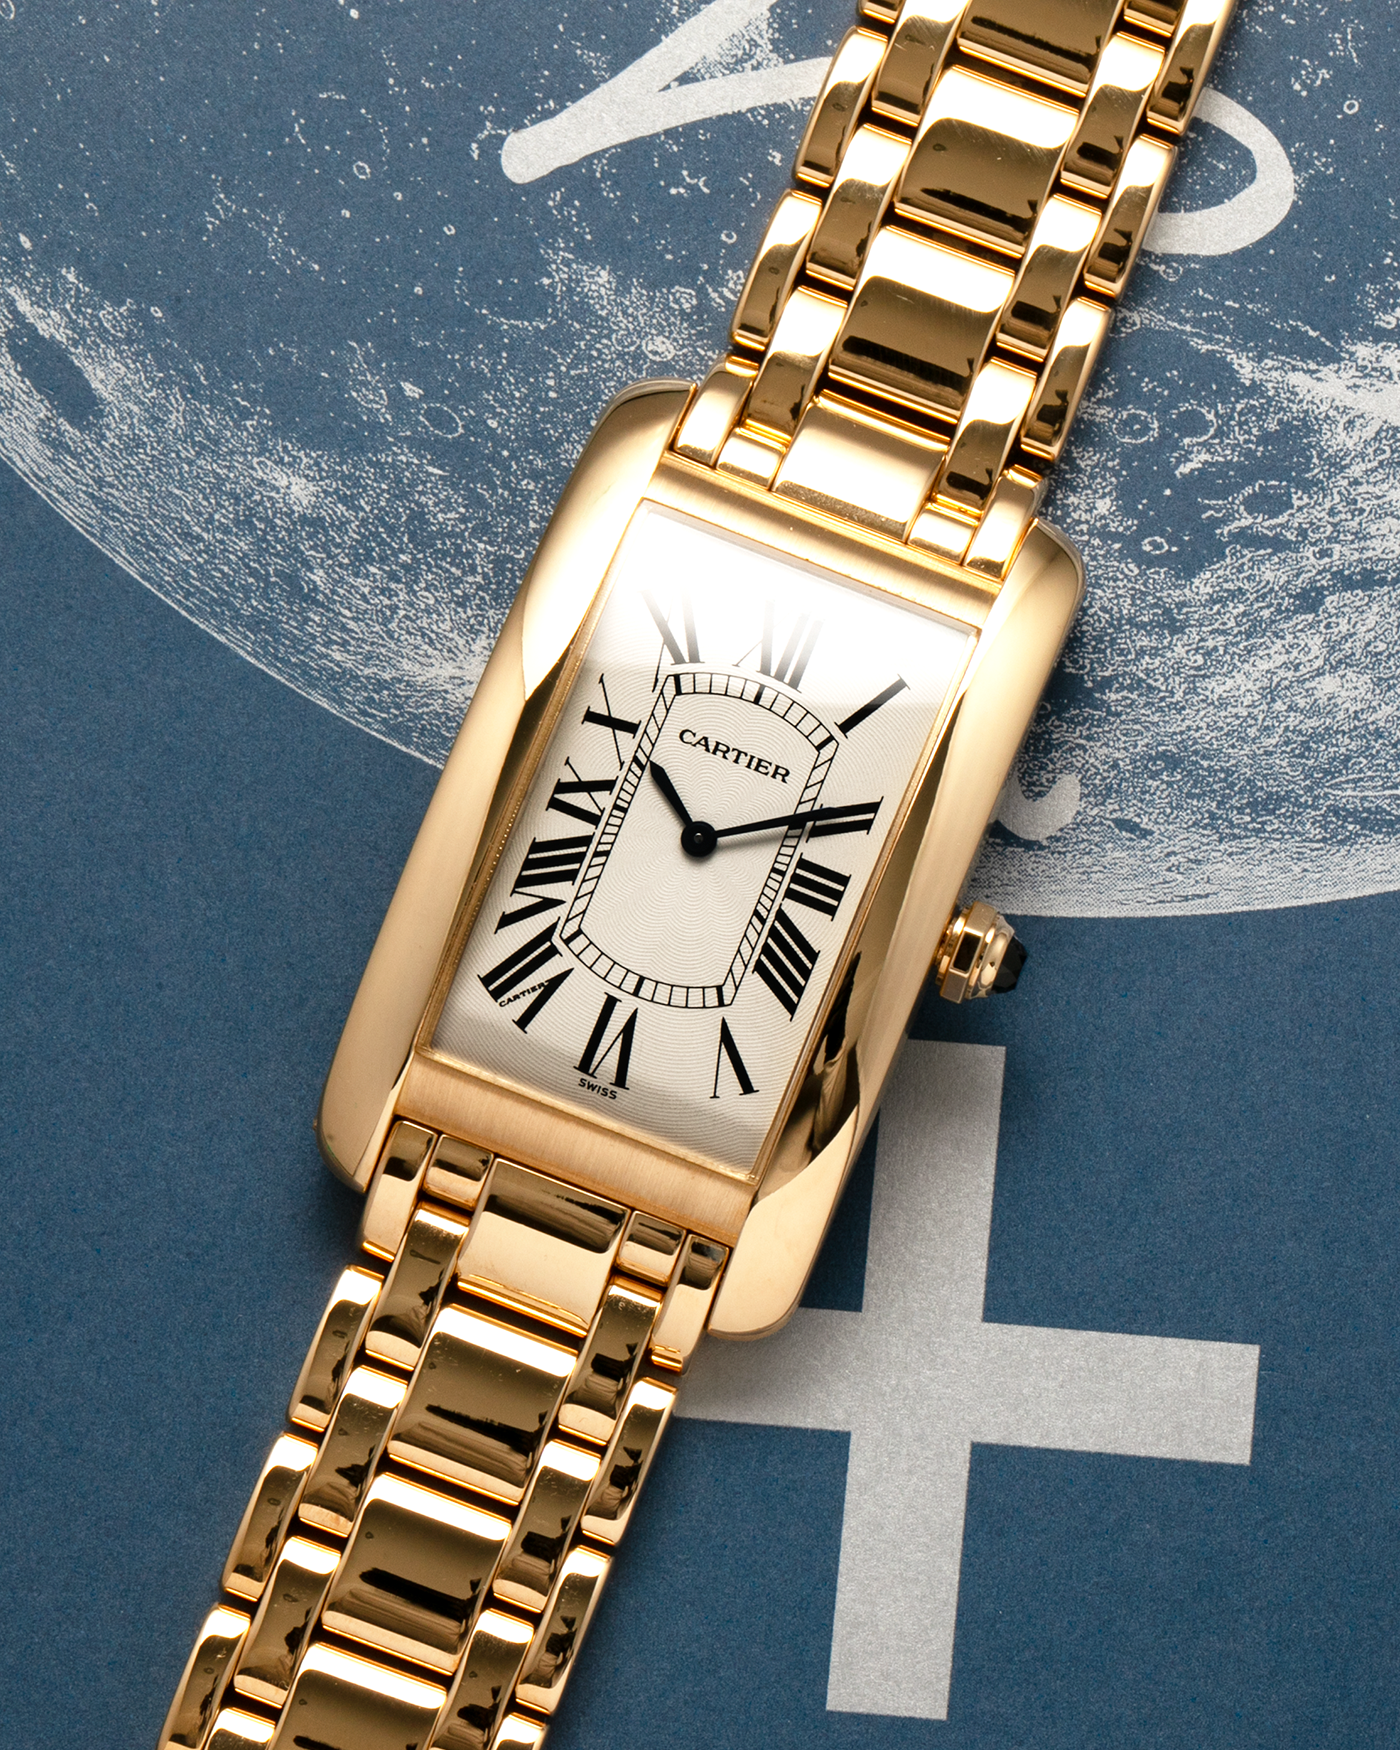 Brand: Cartier Year: 1990s Model: Tank Américaine Reference: 1735-1 Material: 18-carat Yellow Gold Movement: Cartier Cal. 430 MC (Piaget Cal. 430P based), Manual-Winding Case Dimensions: 44mm x 26mm x 7.5mm Lug Width: 18mm Bracelet: Cartier Bracelet in full 18-carat Yellow Gold with Signed Butterfly Clasp